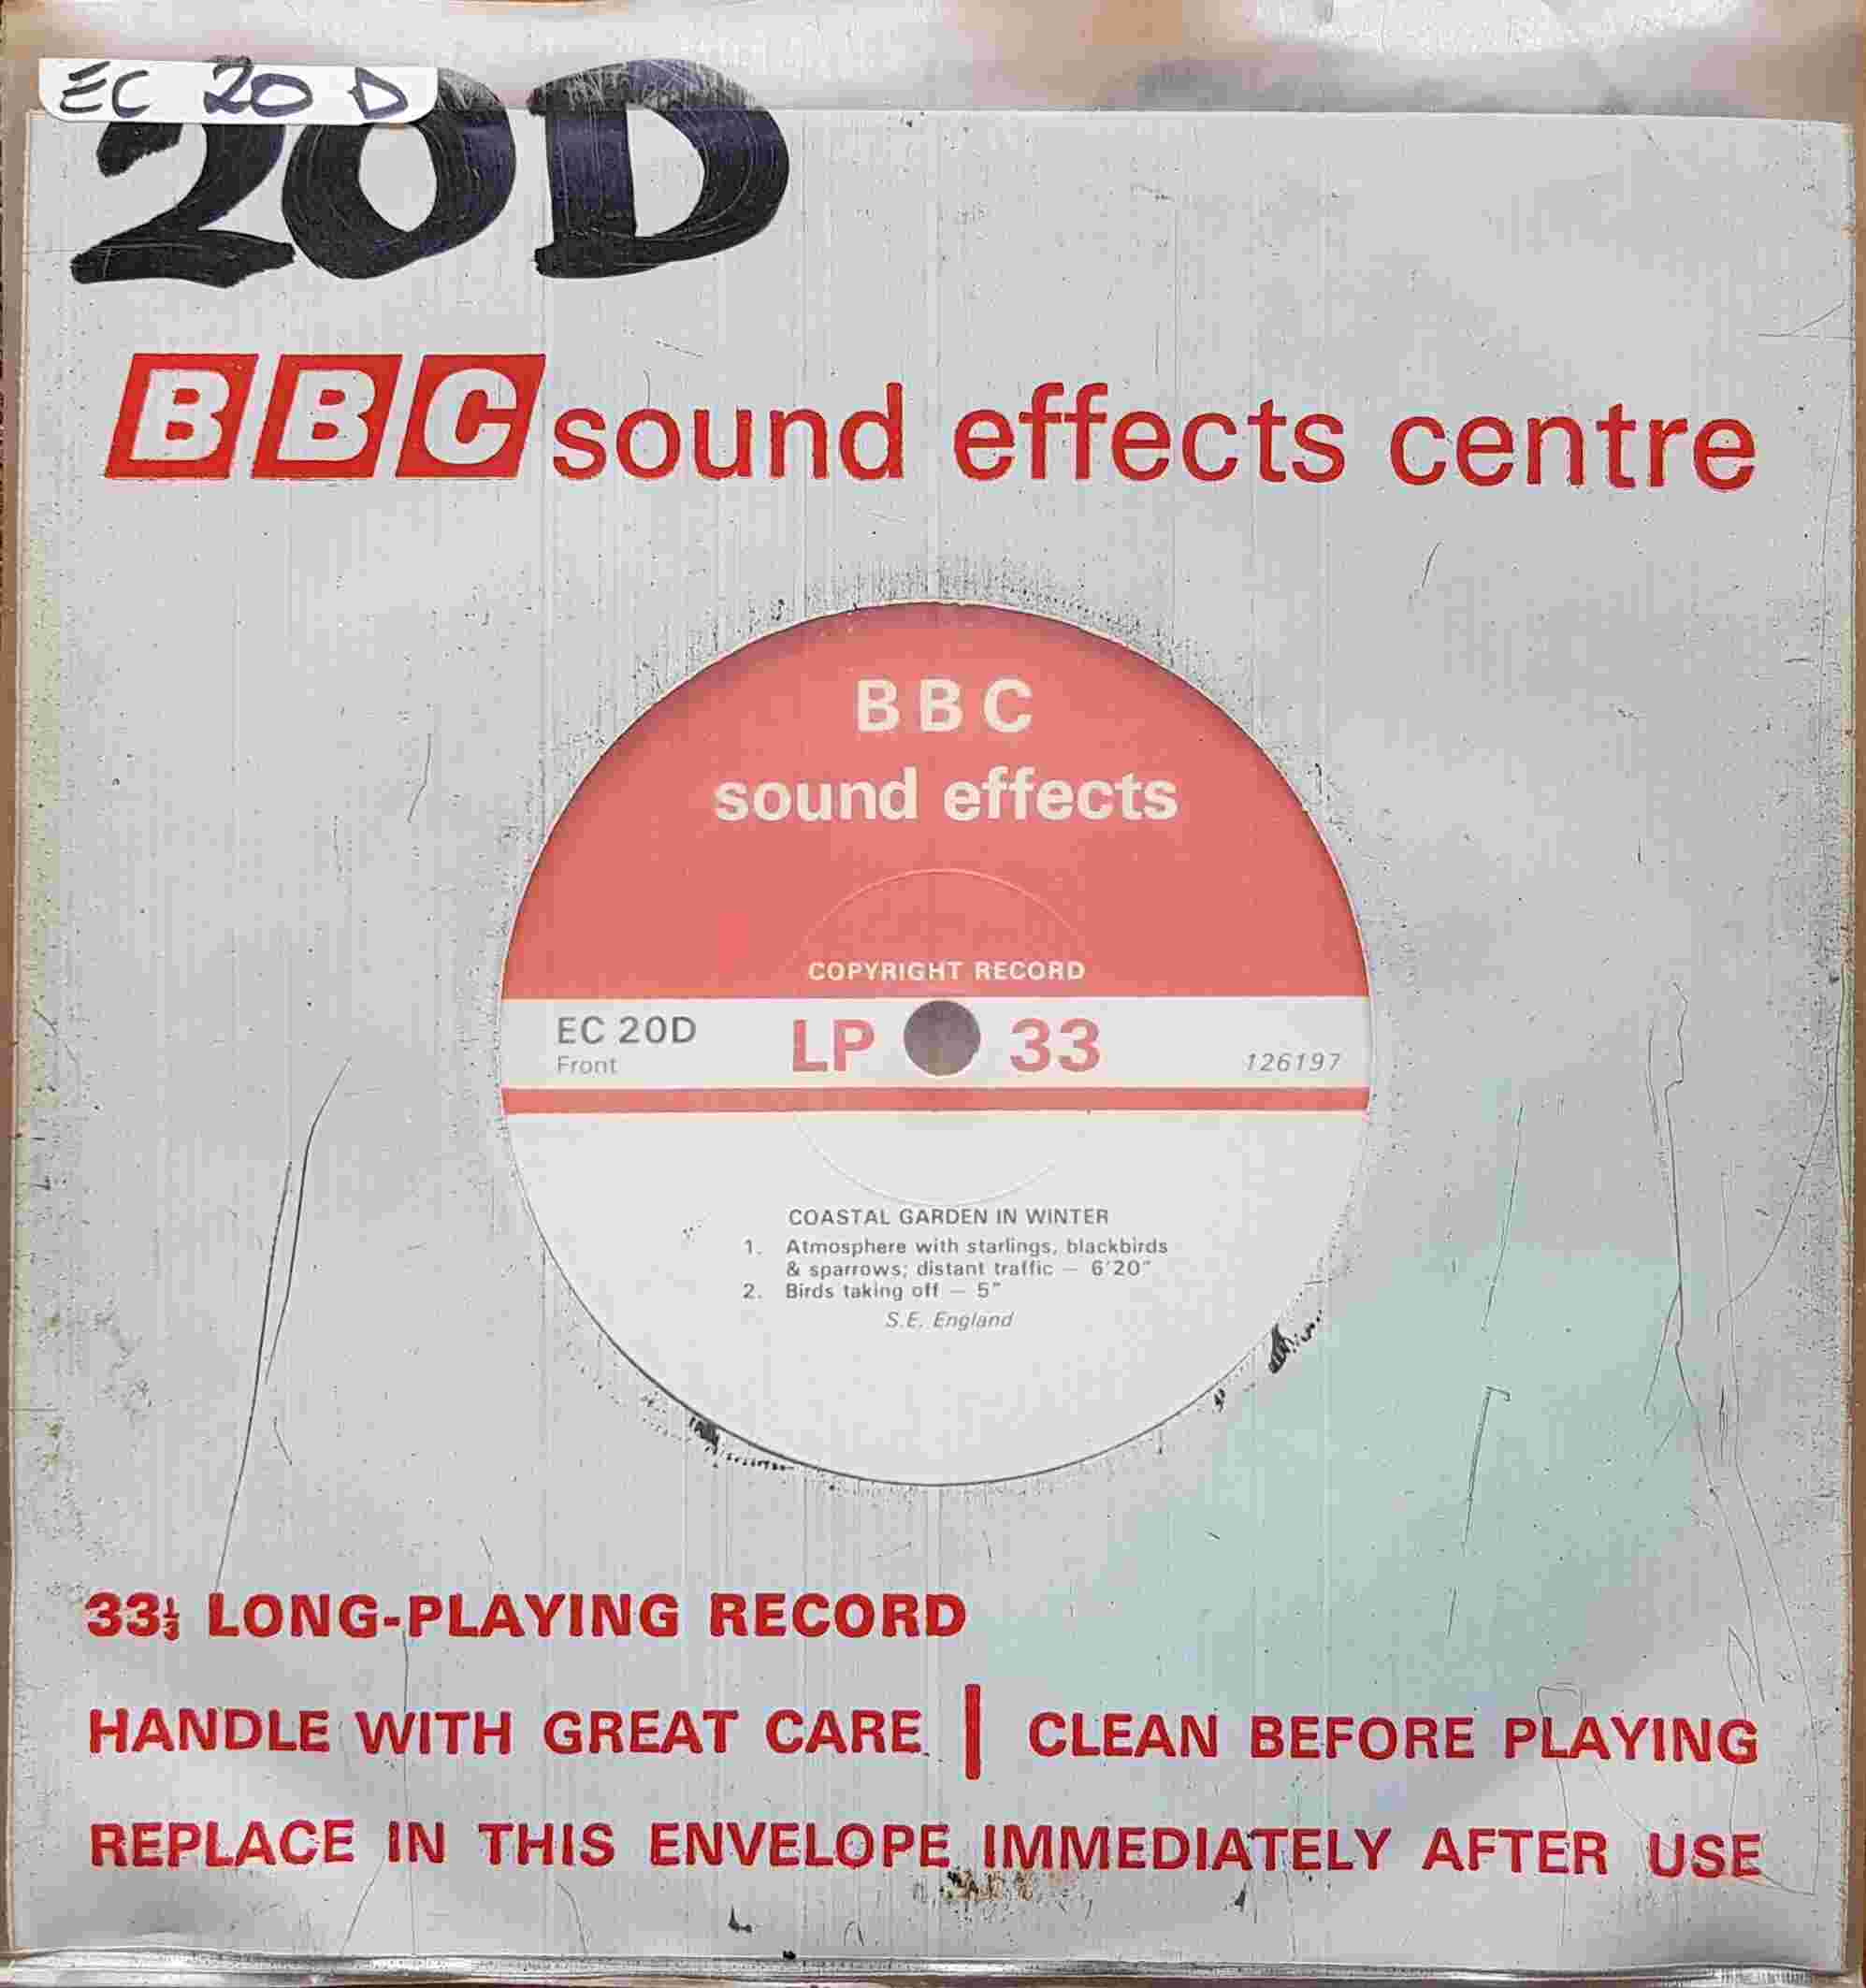 Picture of EC 20D Coastal garden in winter by artist Not registered from the BBC singles - Records and Tapes library